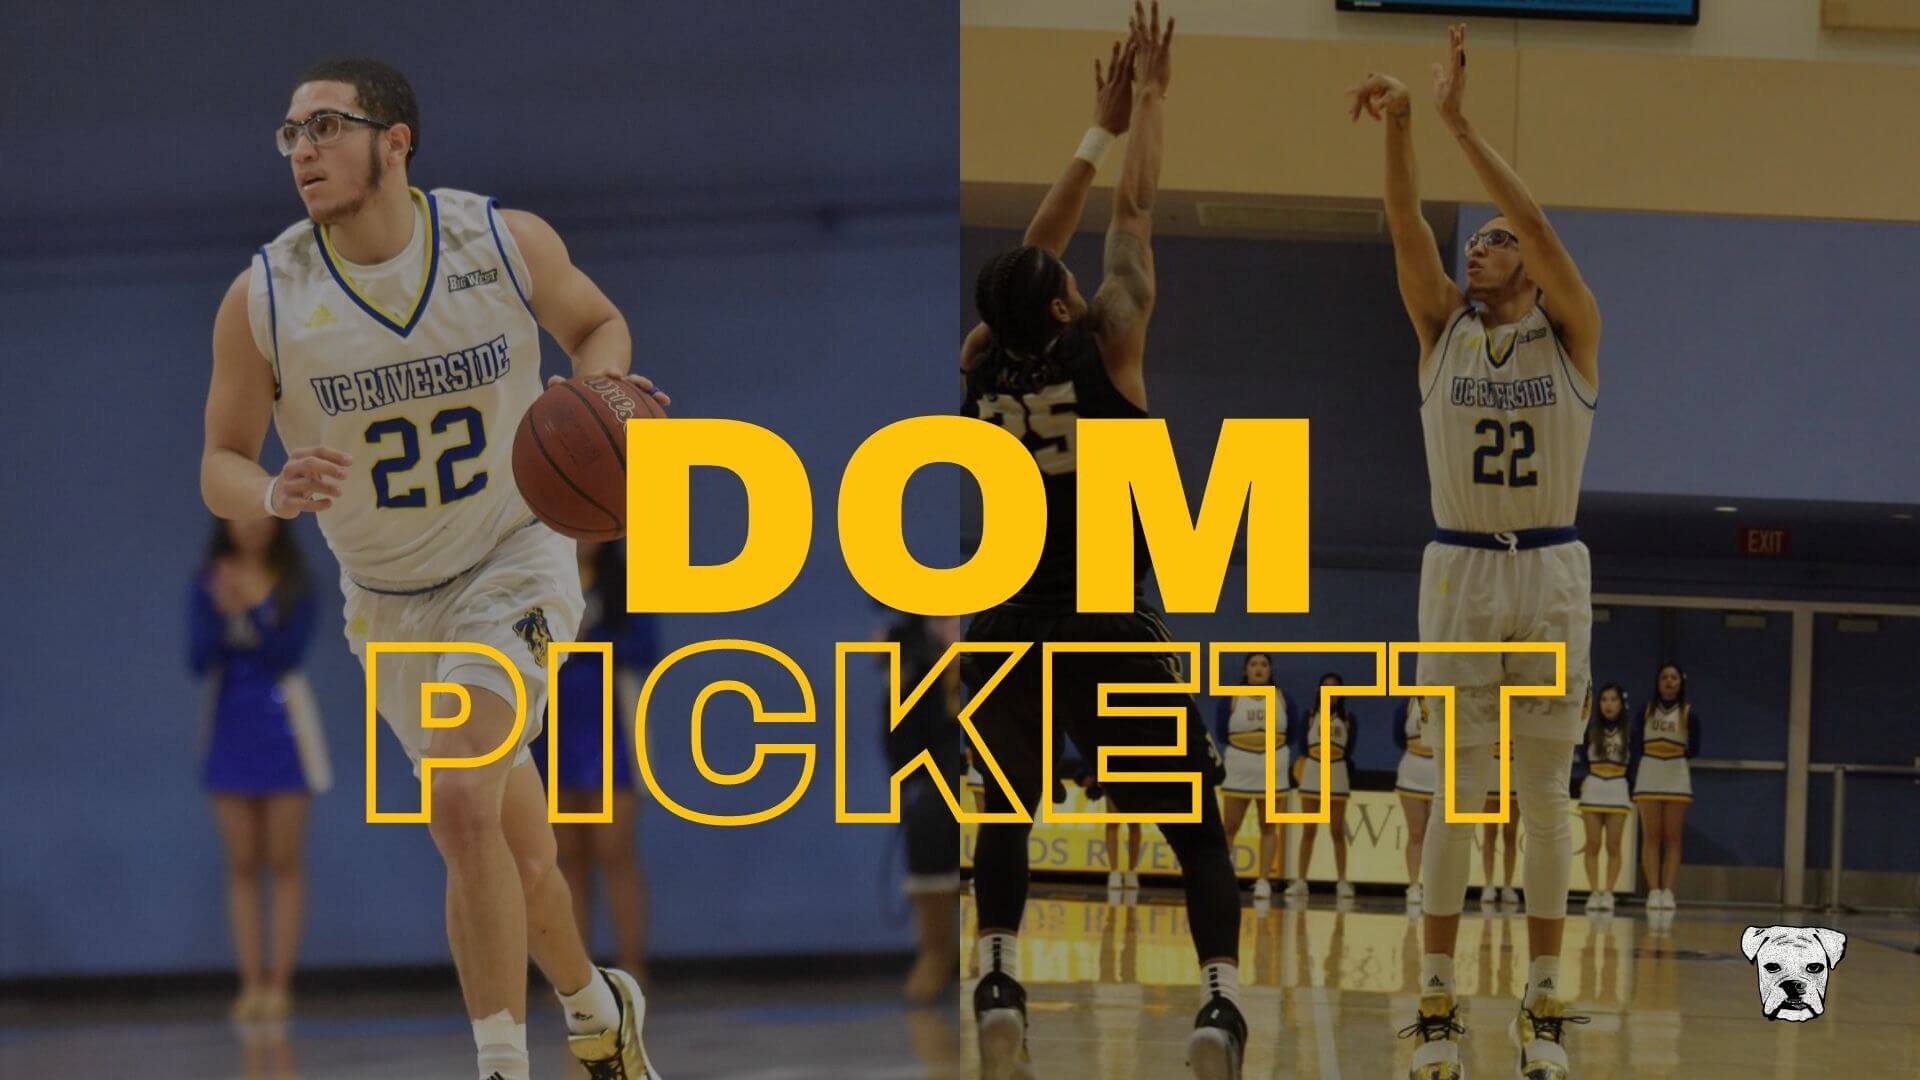 Dominick Pickett's basketball journey from team manager to division 1 award winner